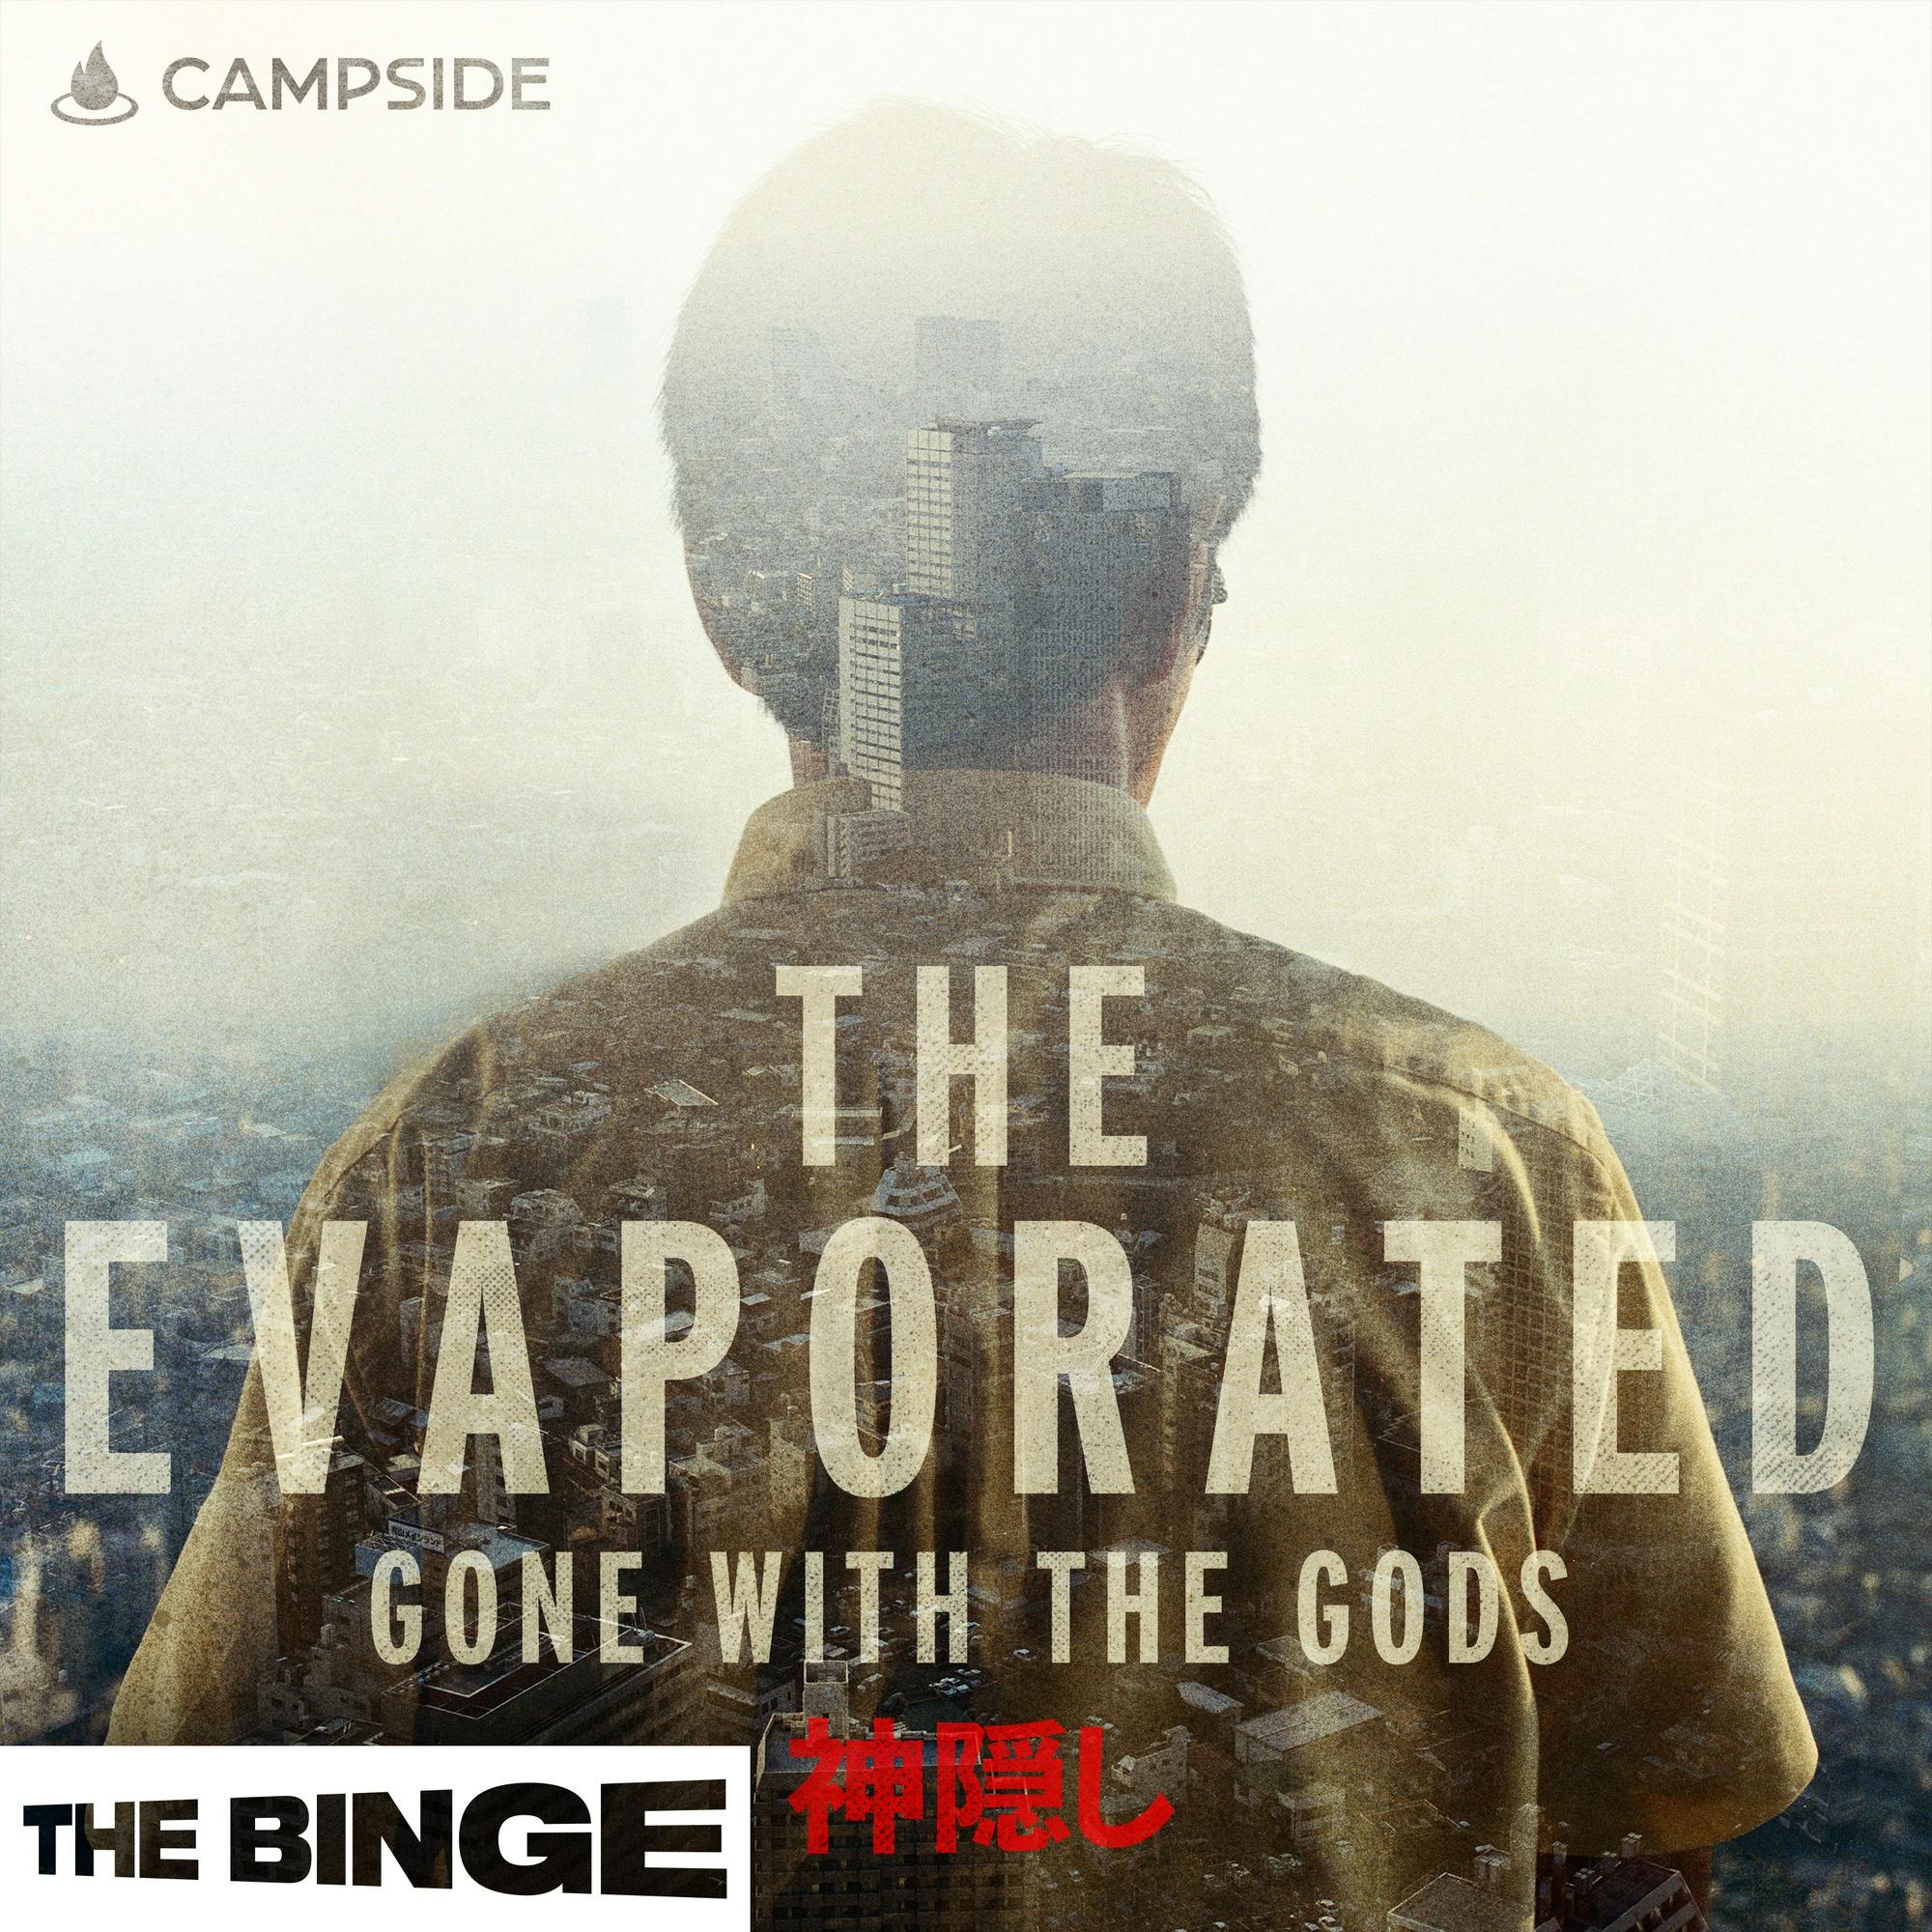 The Evaporated: Gone with the Gods (Ad-Free, THE BINGE) podcast tile